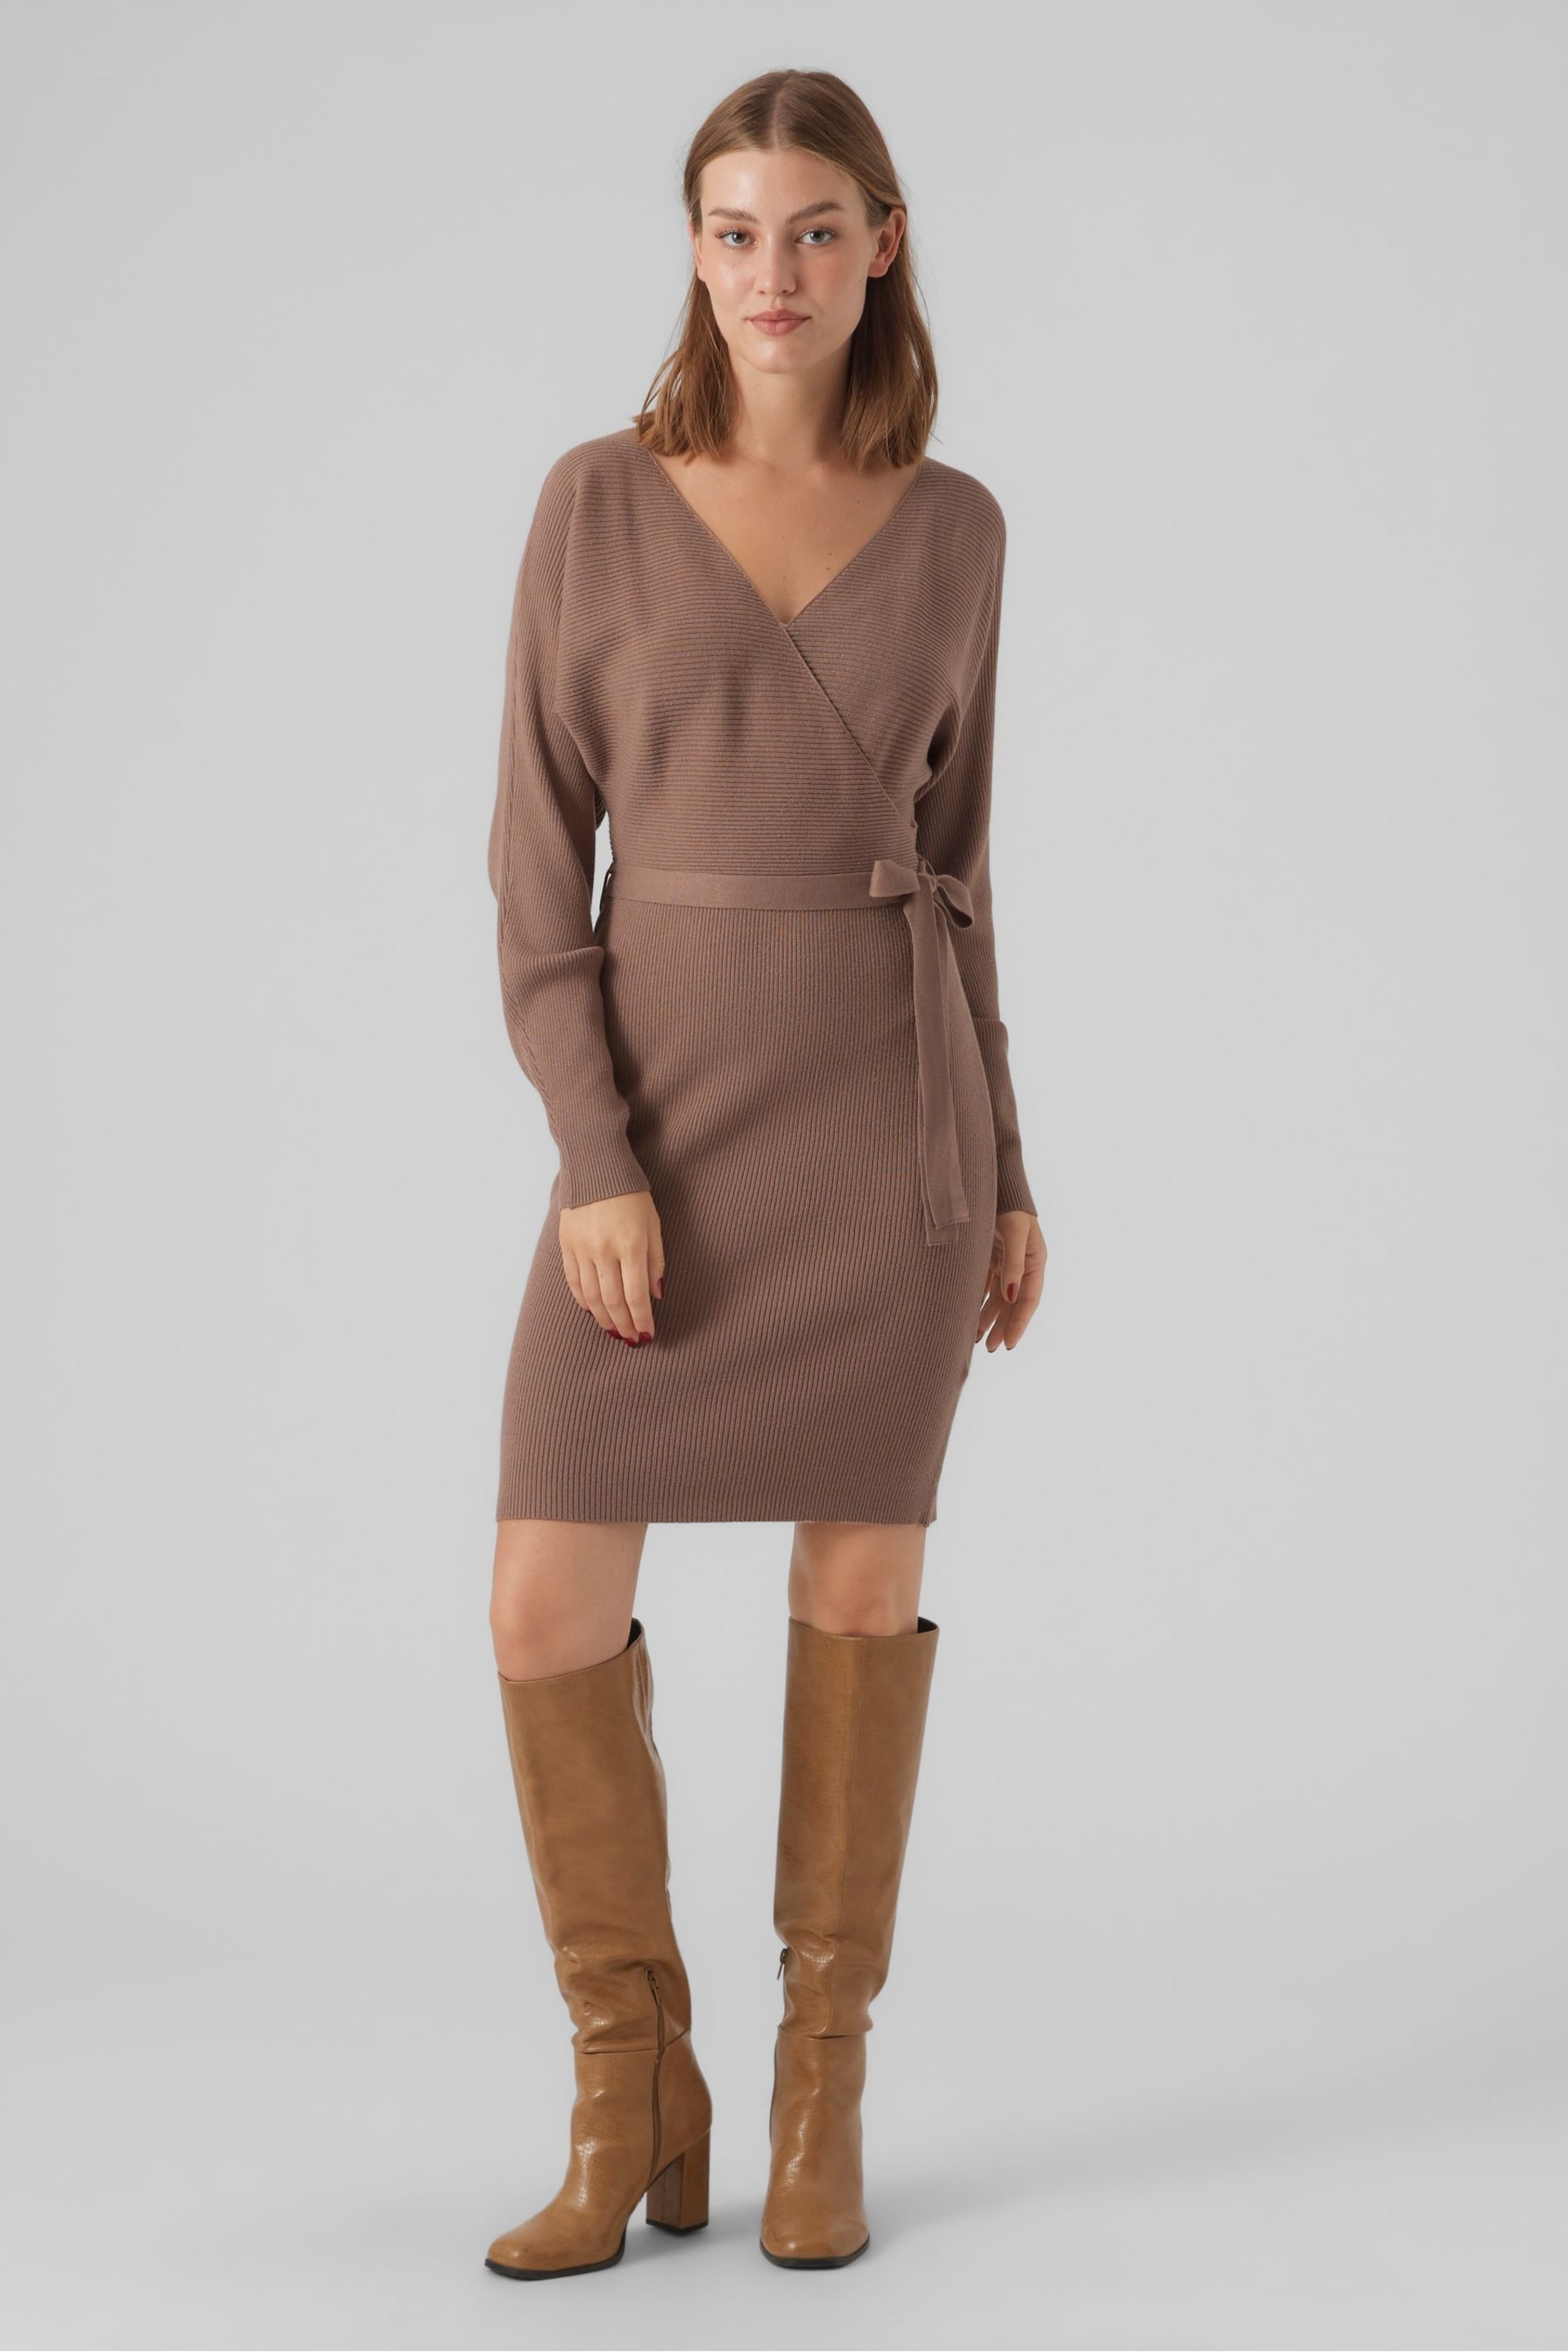 VERO MODA Brown V-Neck Wrap Belted Knitted Dress - Image 1 of 5